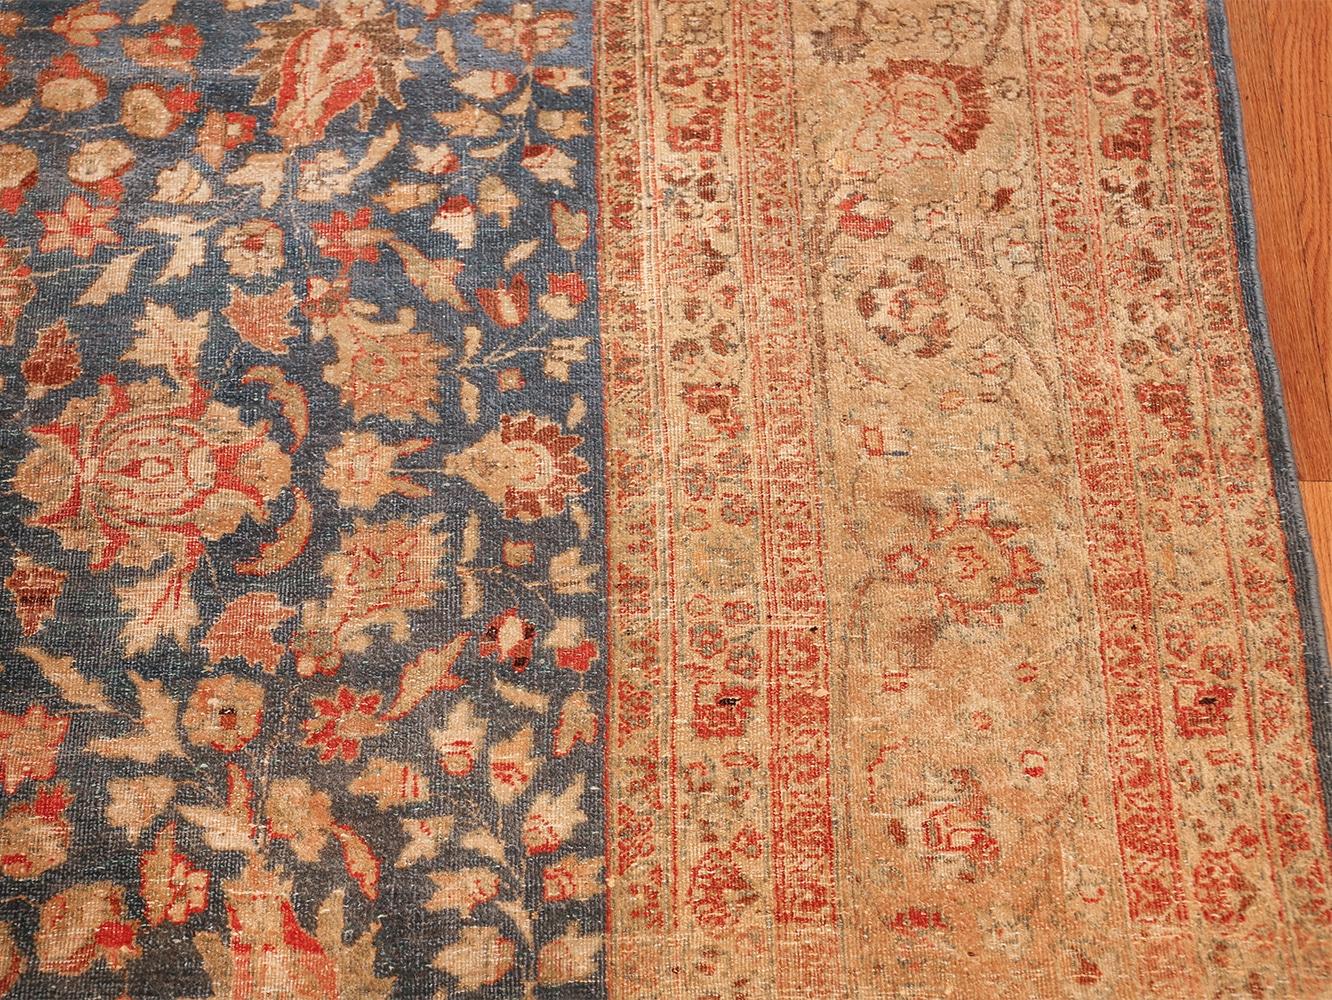 Breathtaking Antique Room Size Blue and Rust Persian Khorassan Rug 10' x 14'6